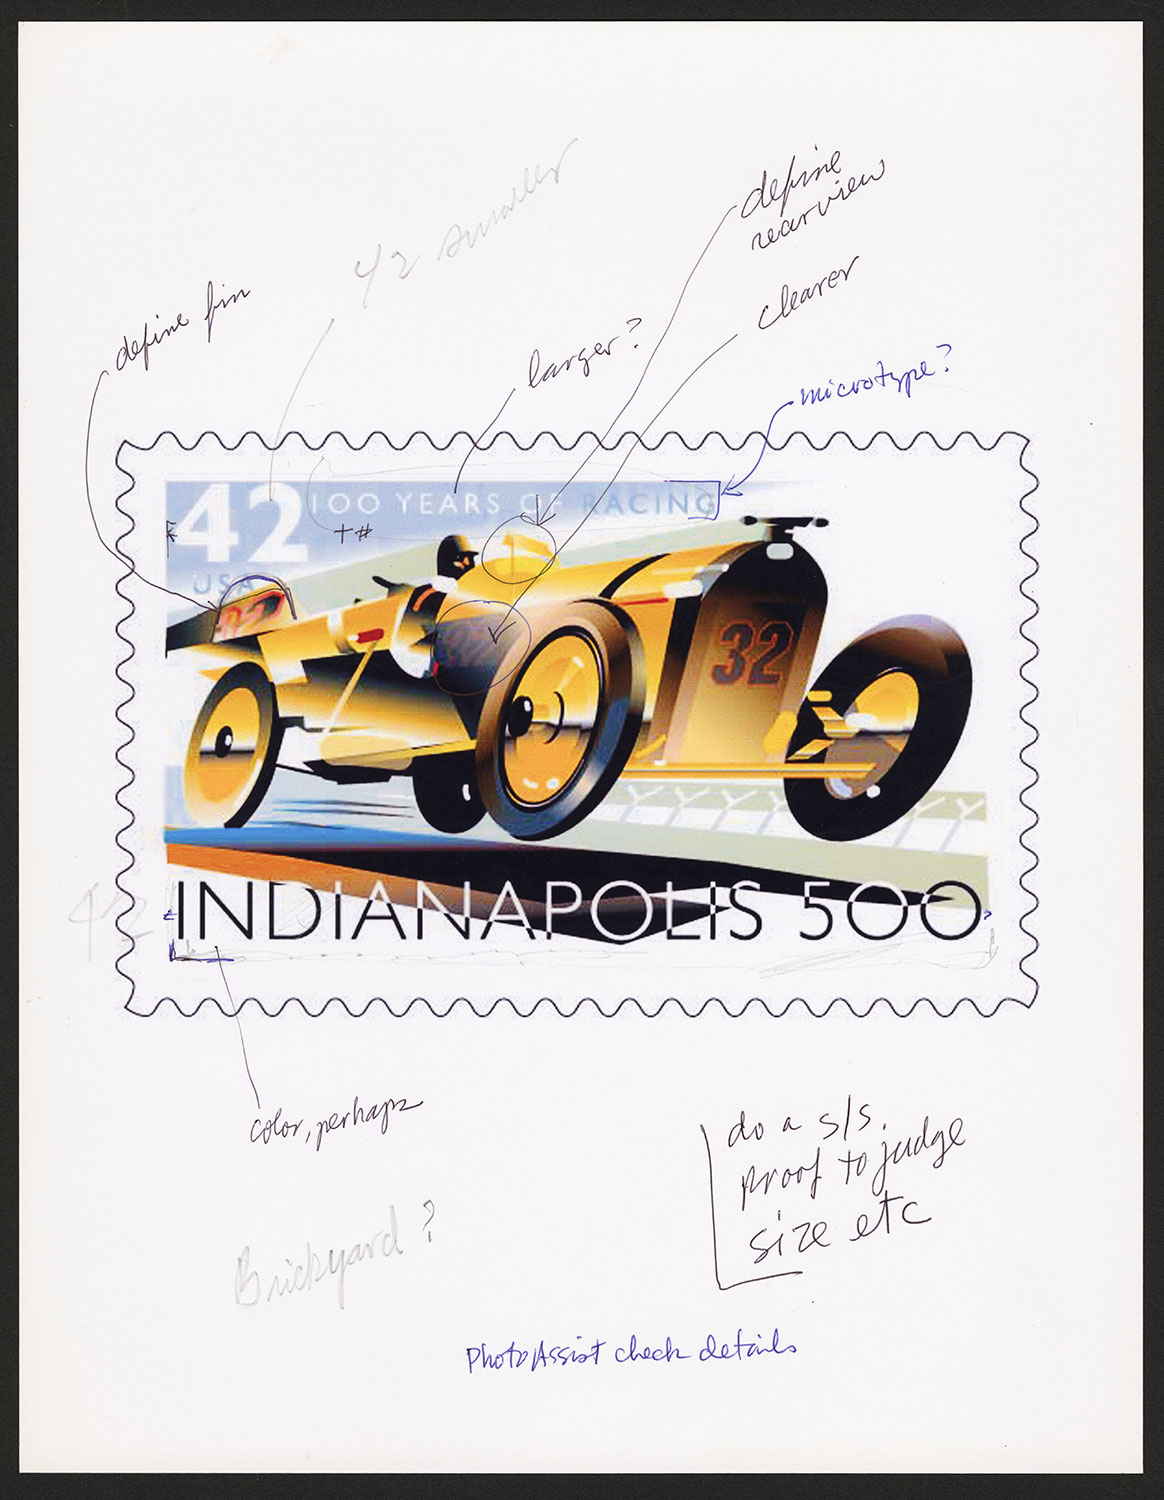 Design drawing with notations of the Indianapolis 500 stamp featuring a vintage race car